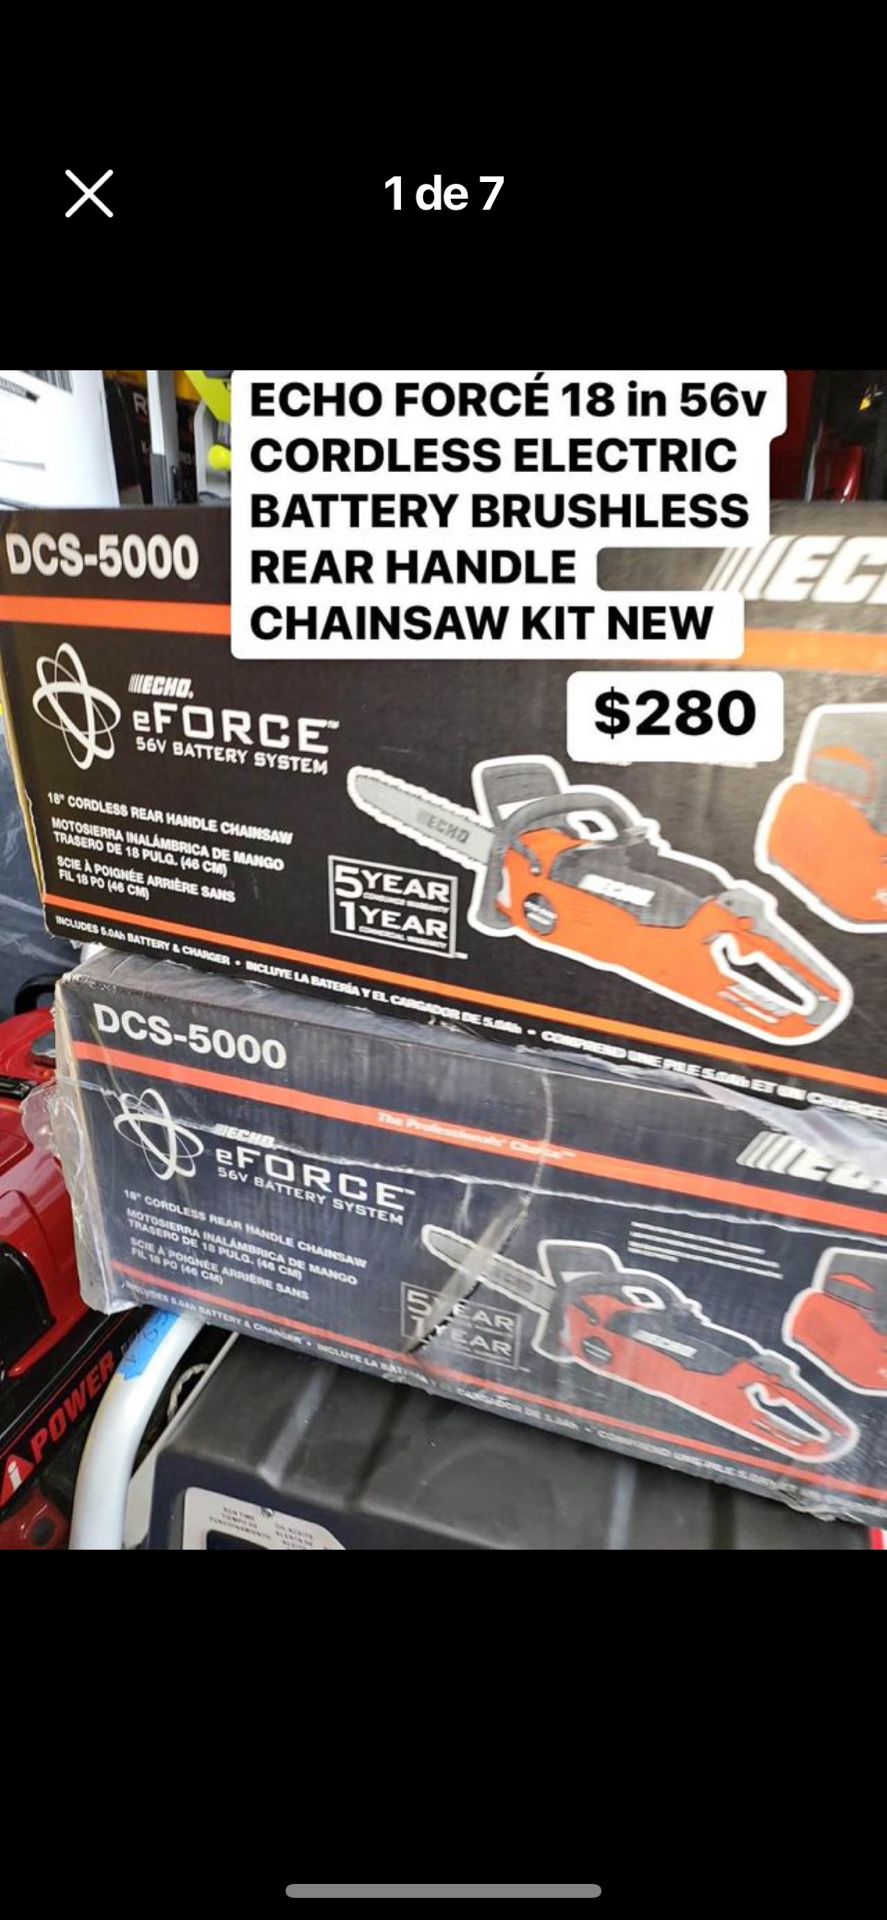 ECHO FORCE 18 in 56v CORDLESS ELECTRIC BATTERY BRUSHLESS REAR HANDLE CHAINSAW KIT NEW